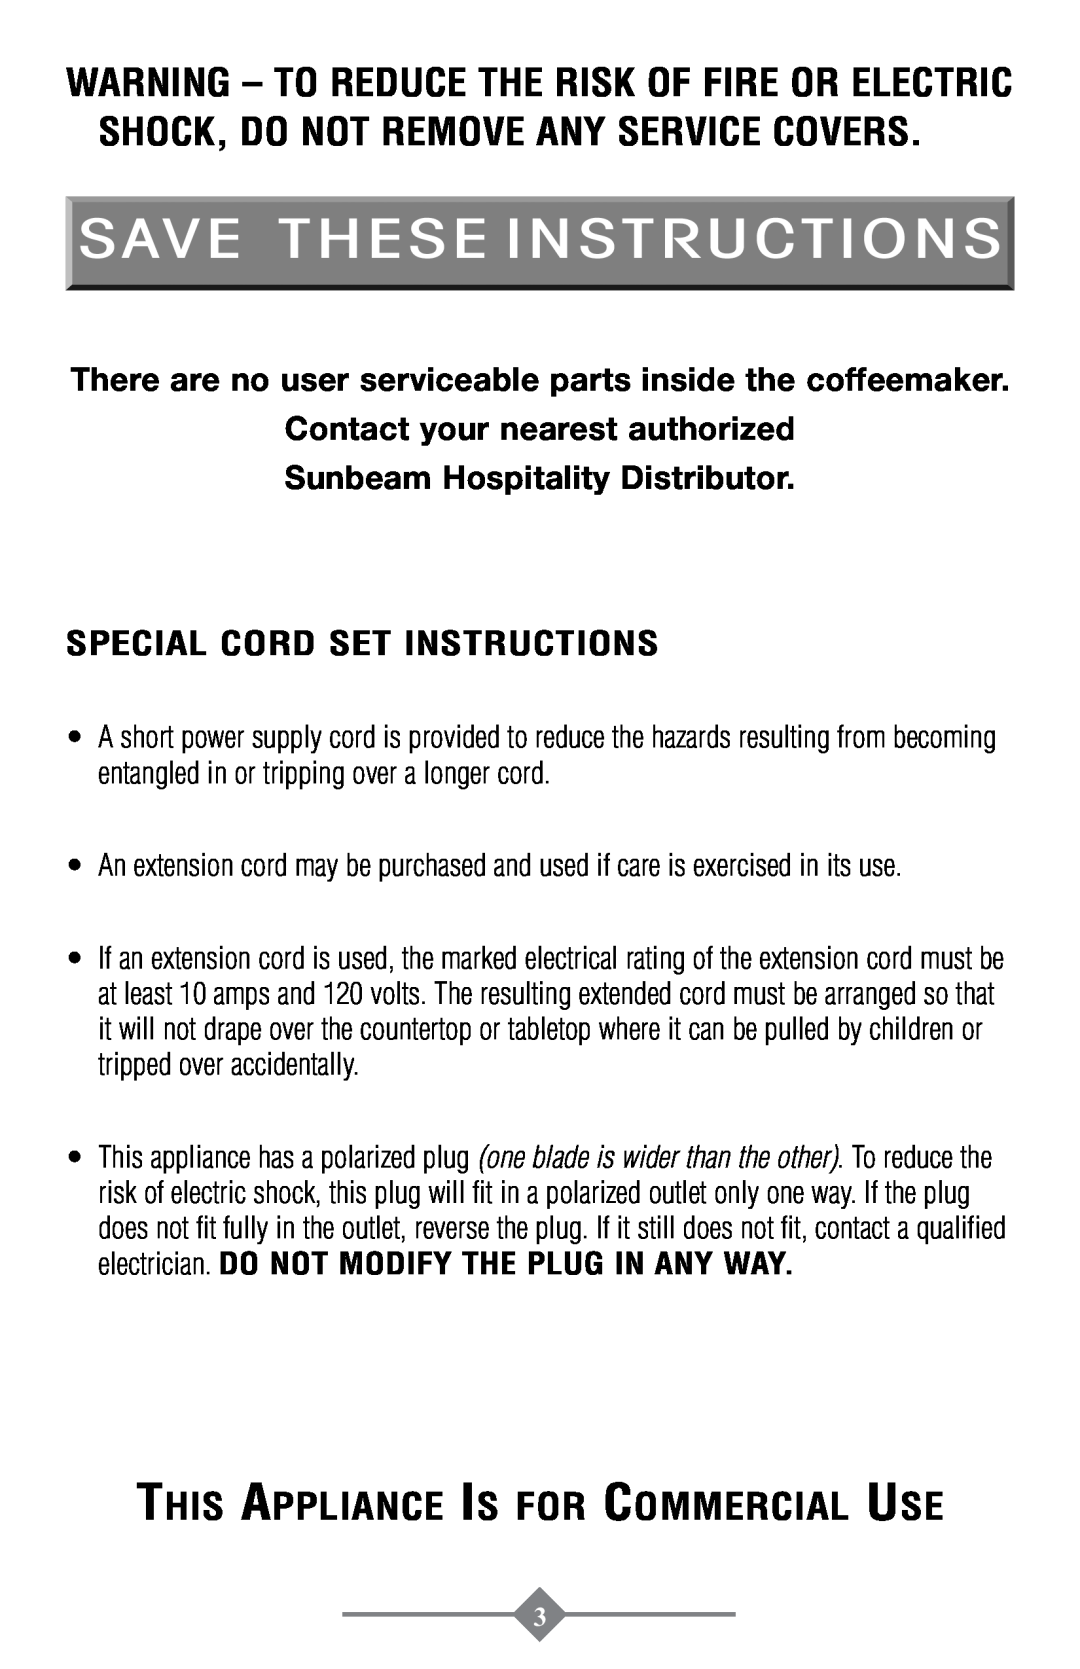 Mr. Coffee PTC13-100 Save These Instructions, This Appliance Is for Commercial Use, Special Cord Set Instructions 